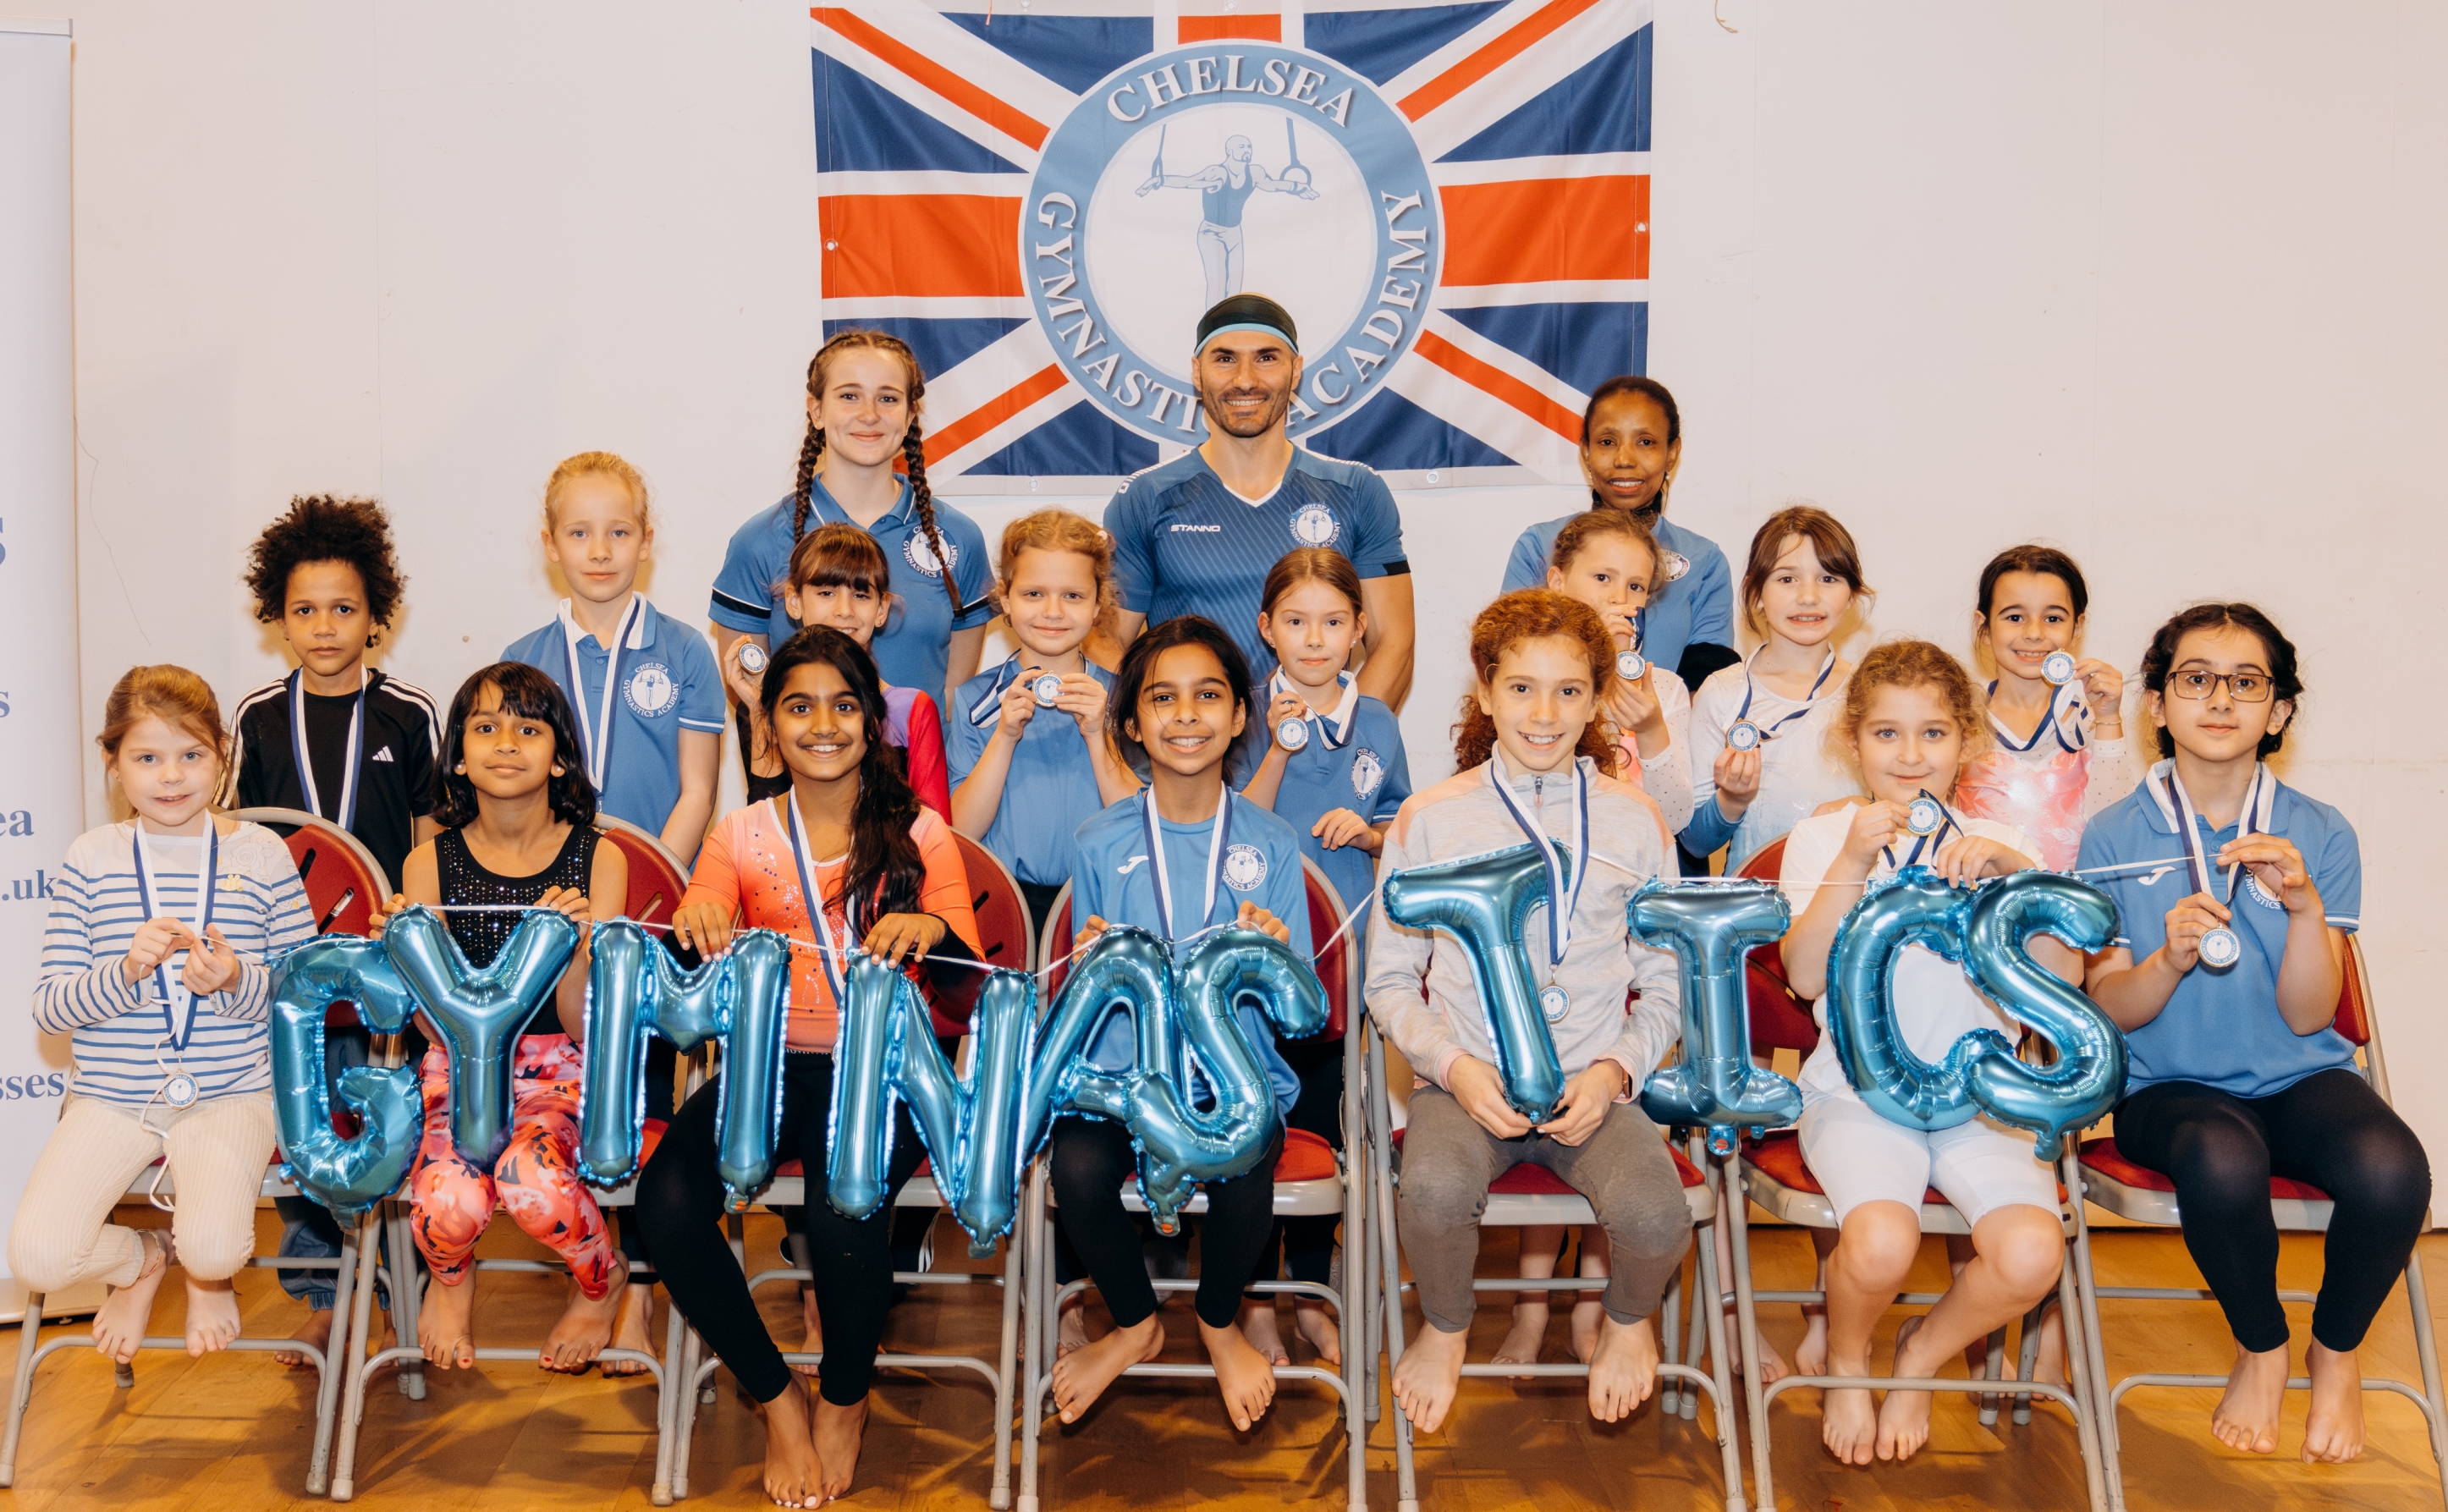 Gymnastics Lessons for children in Kensington and Chelsea